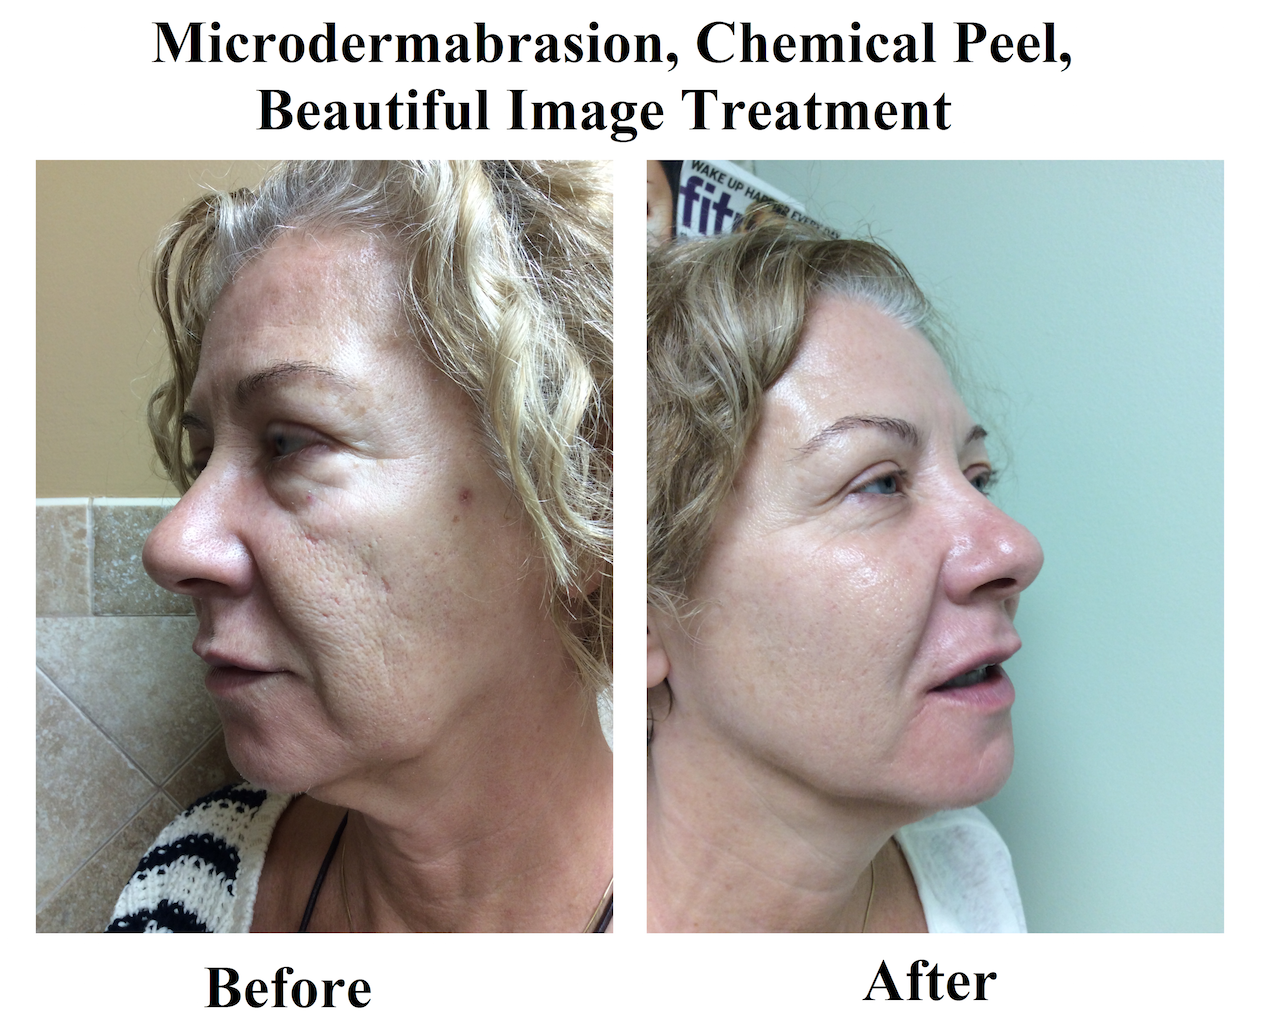 Microdermabrasion In Raleigh Nc Microdermabrasion Raleigh Nc Skin Essence A Day Spaskin